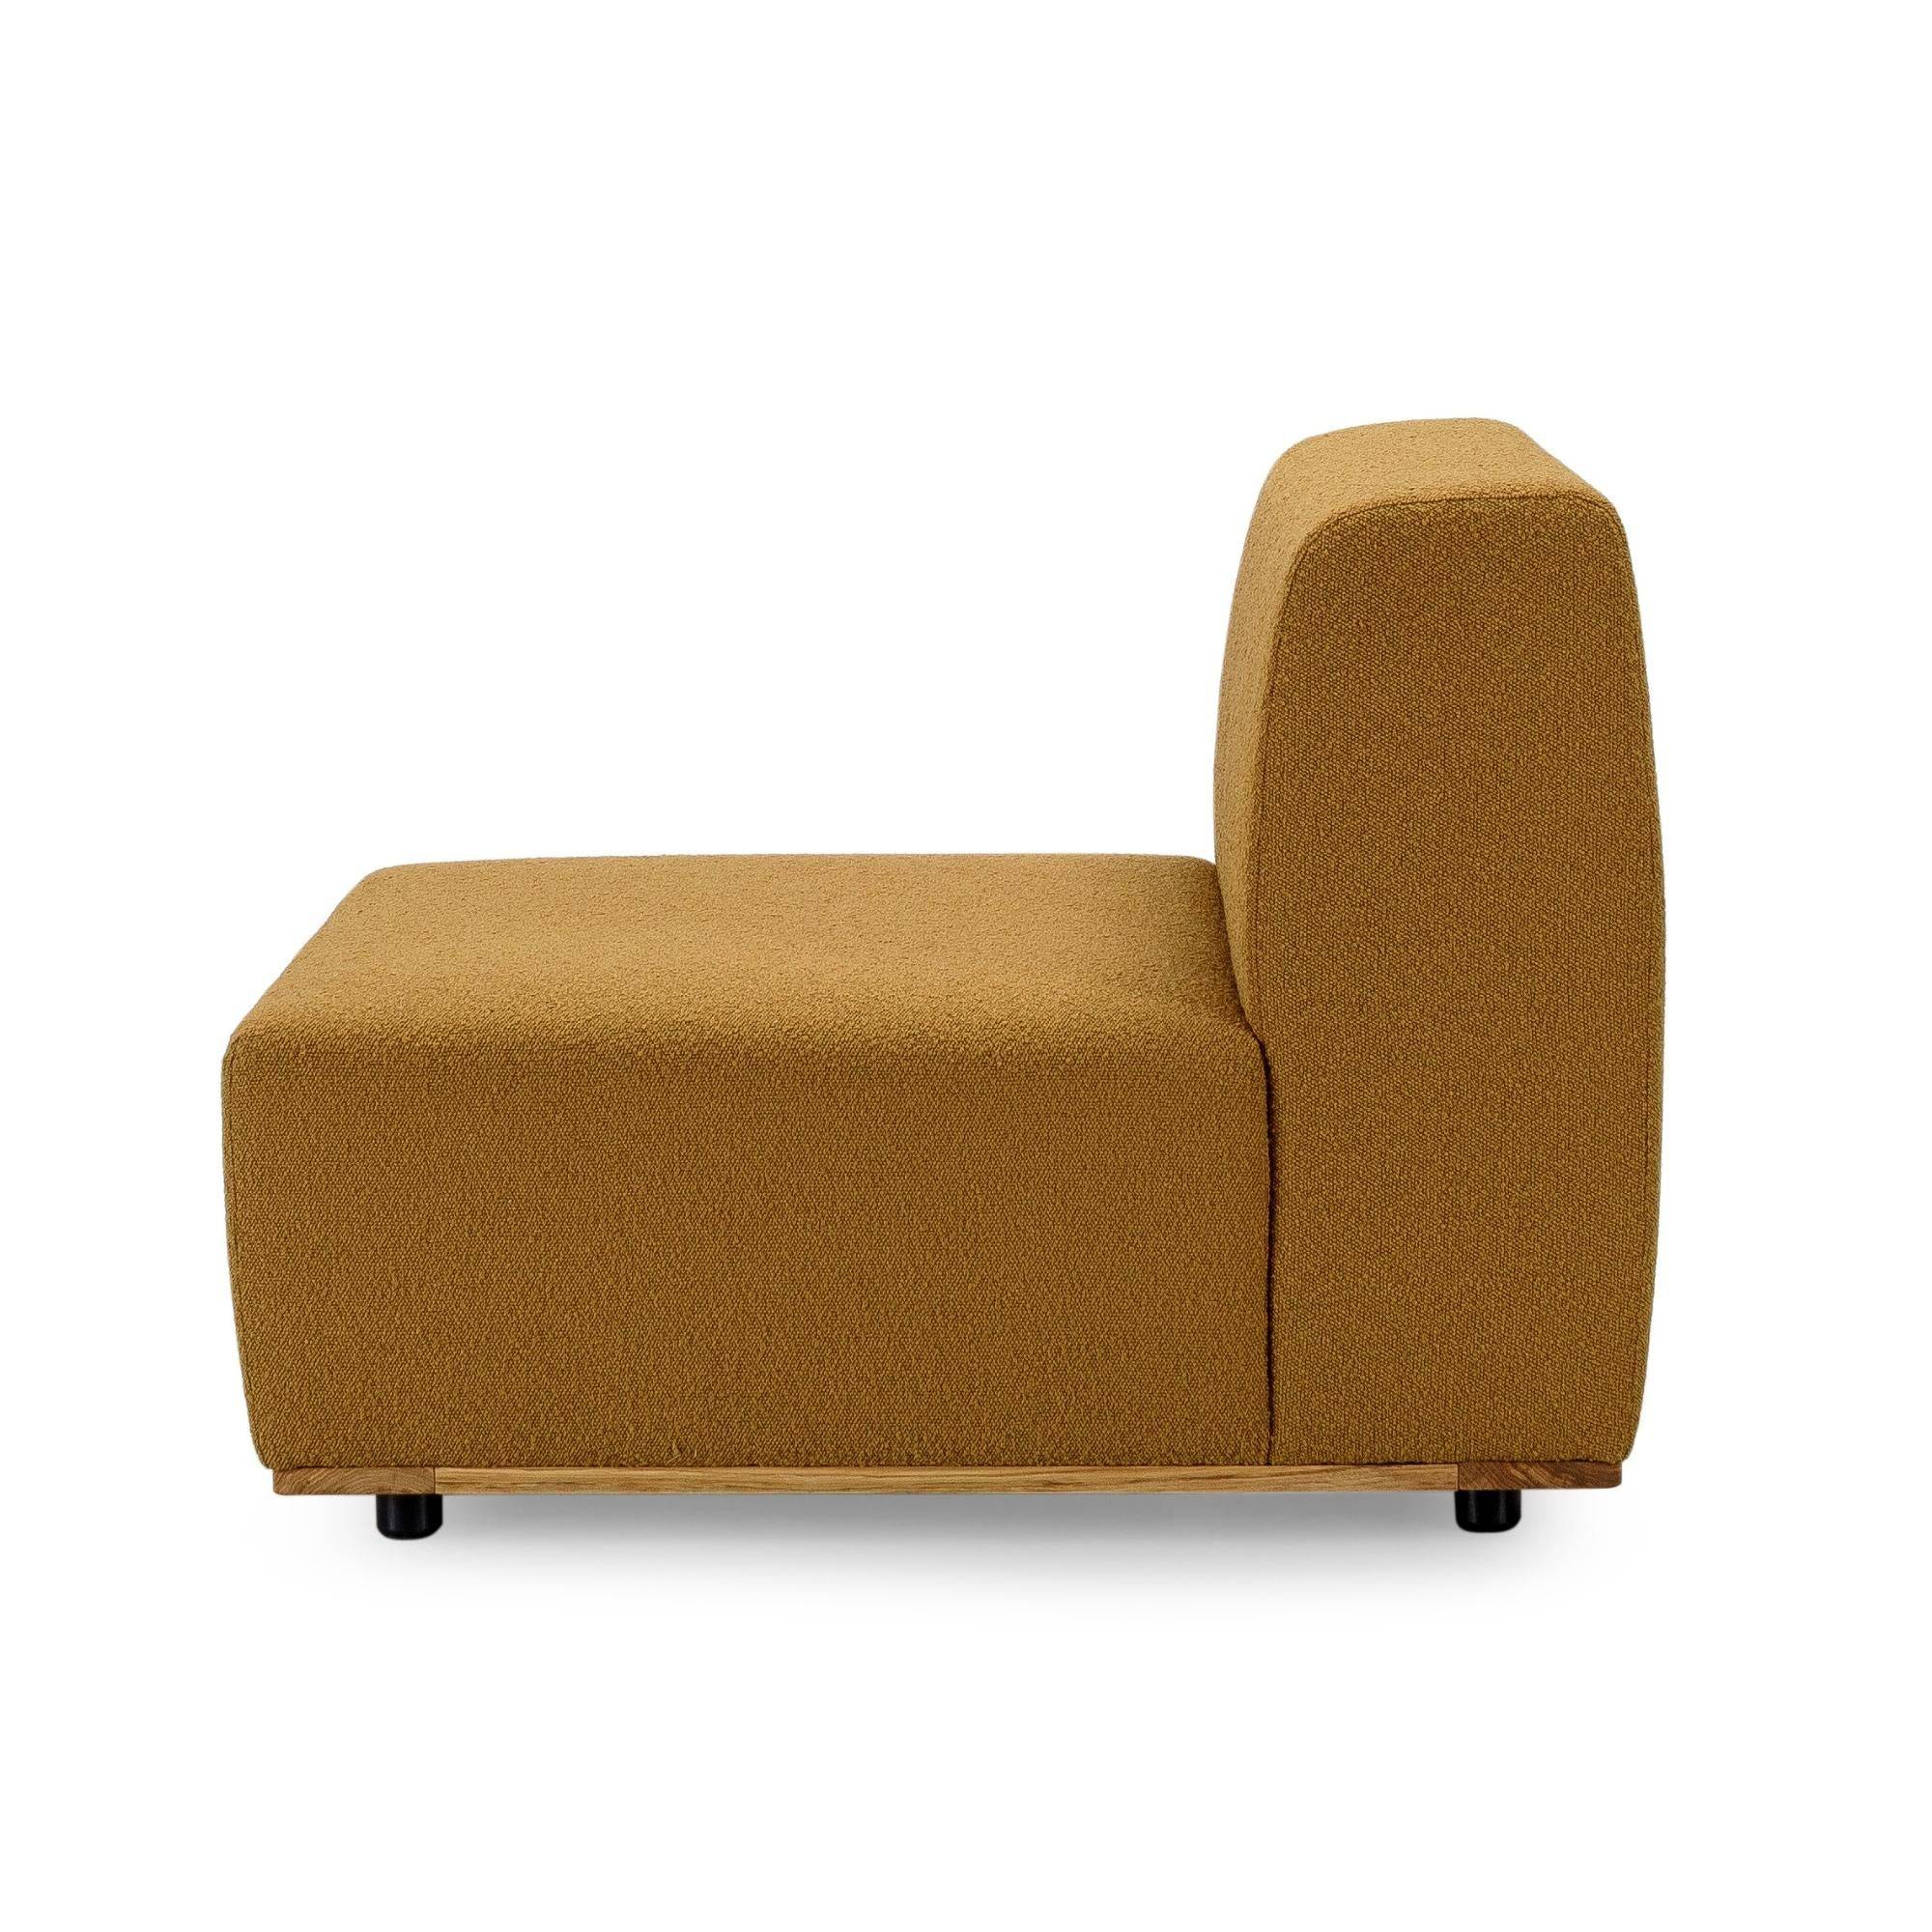 Saler Lounge Chair, Symphony Mills - Mustard - THAT COOL LIVING